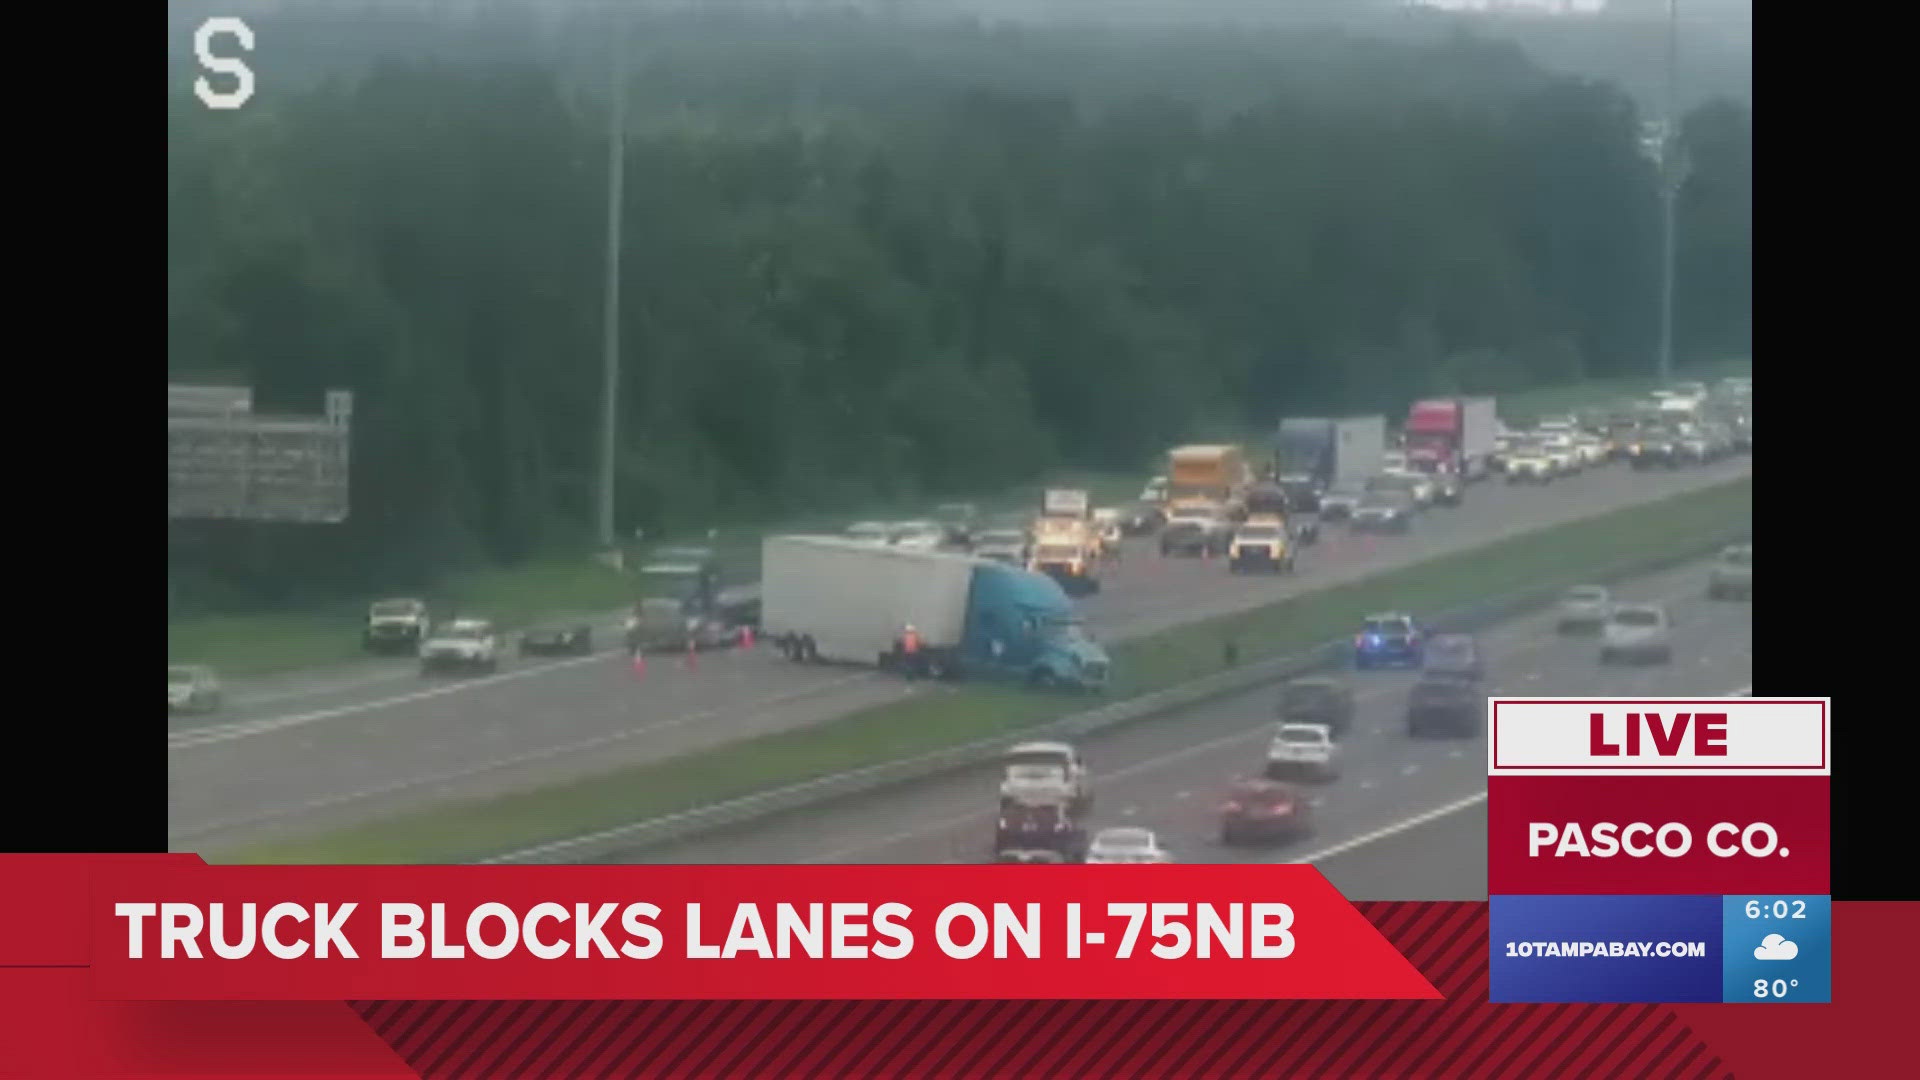 Traffic cameras appear to show at least one semi-truck stopped across the highway.